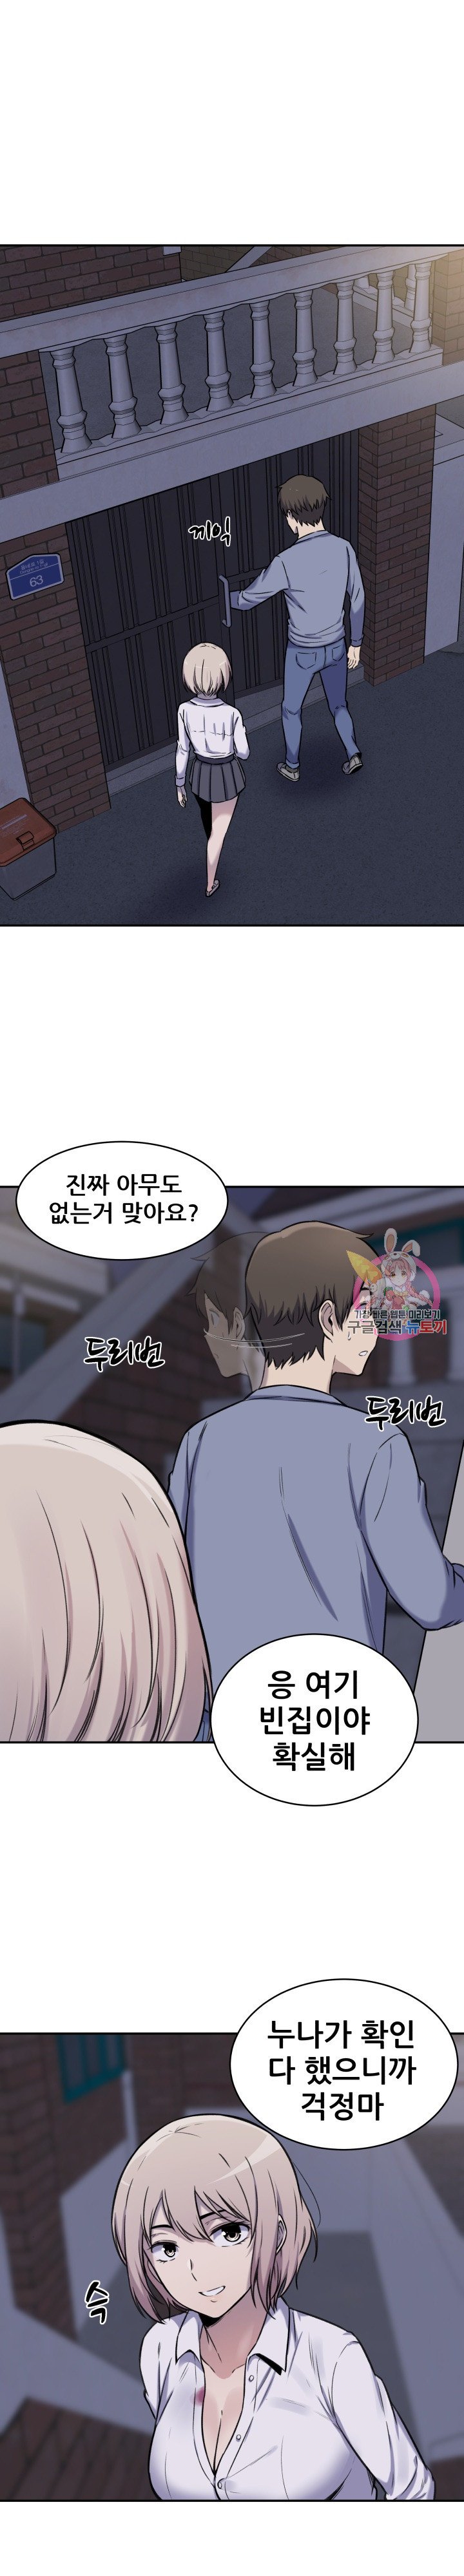 the-ark-is-me-raw-chap-30-14